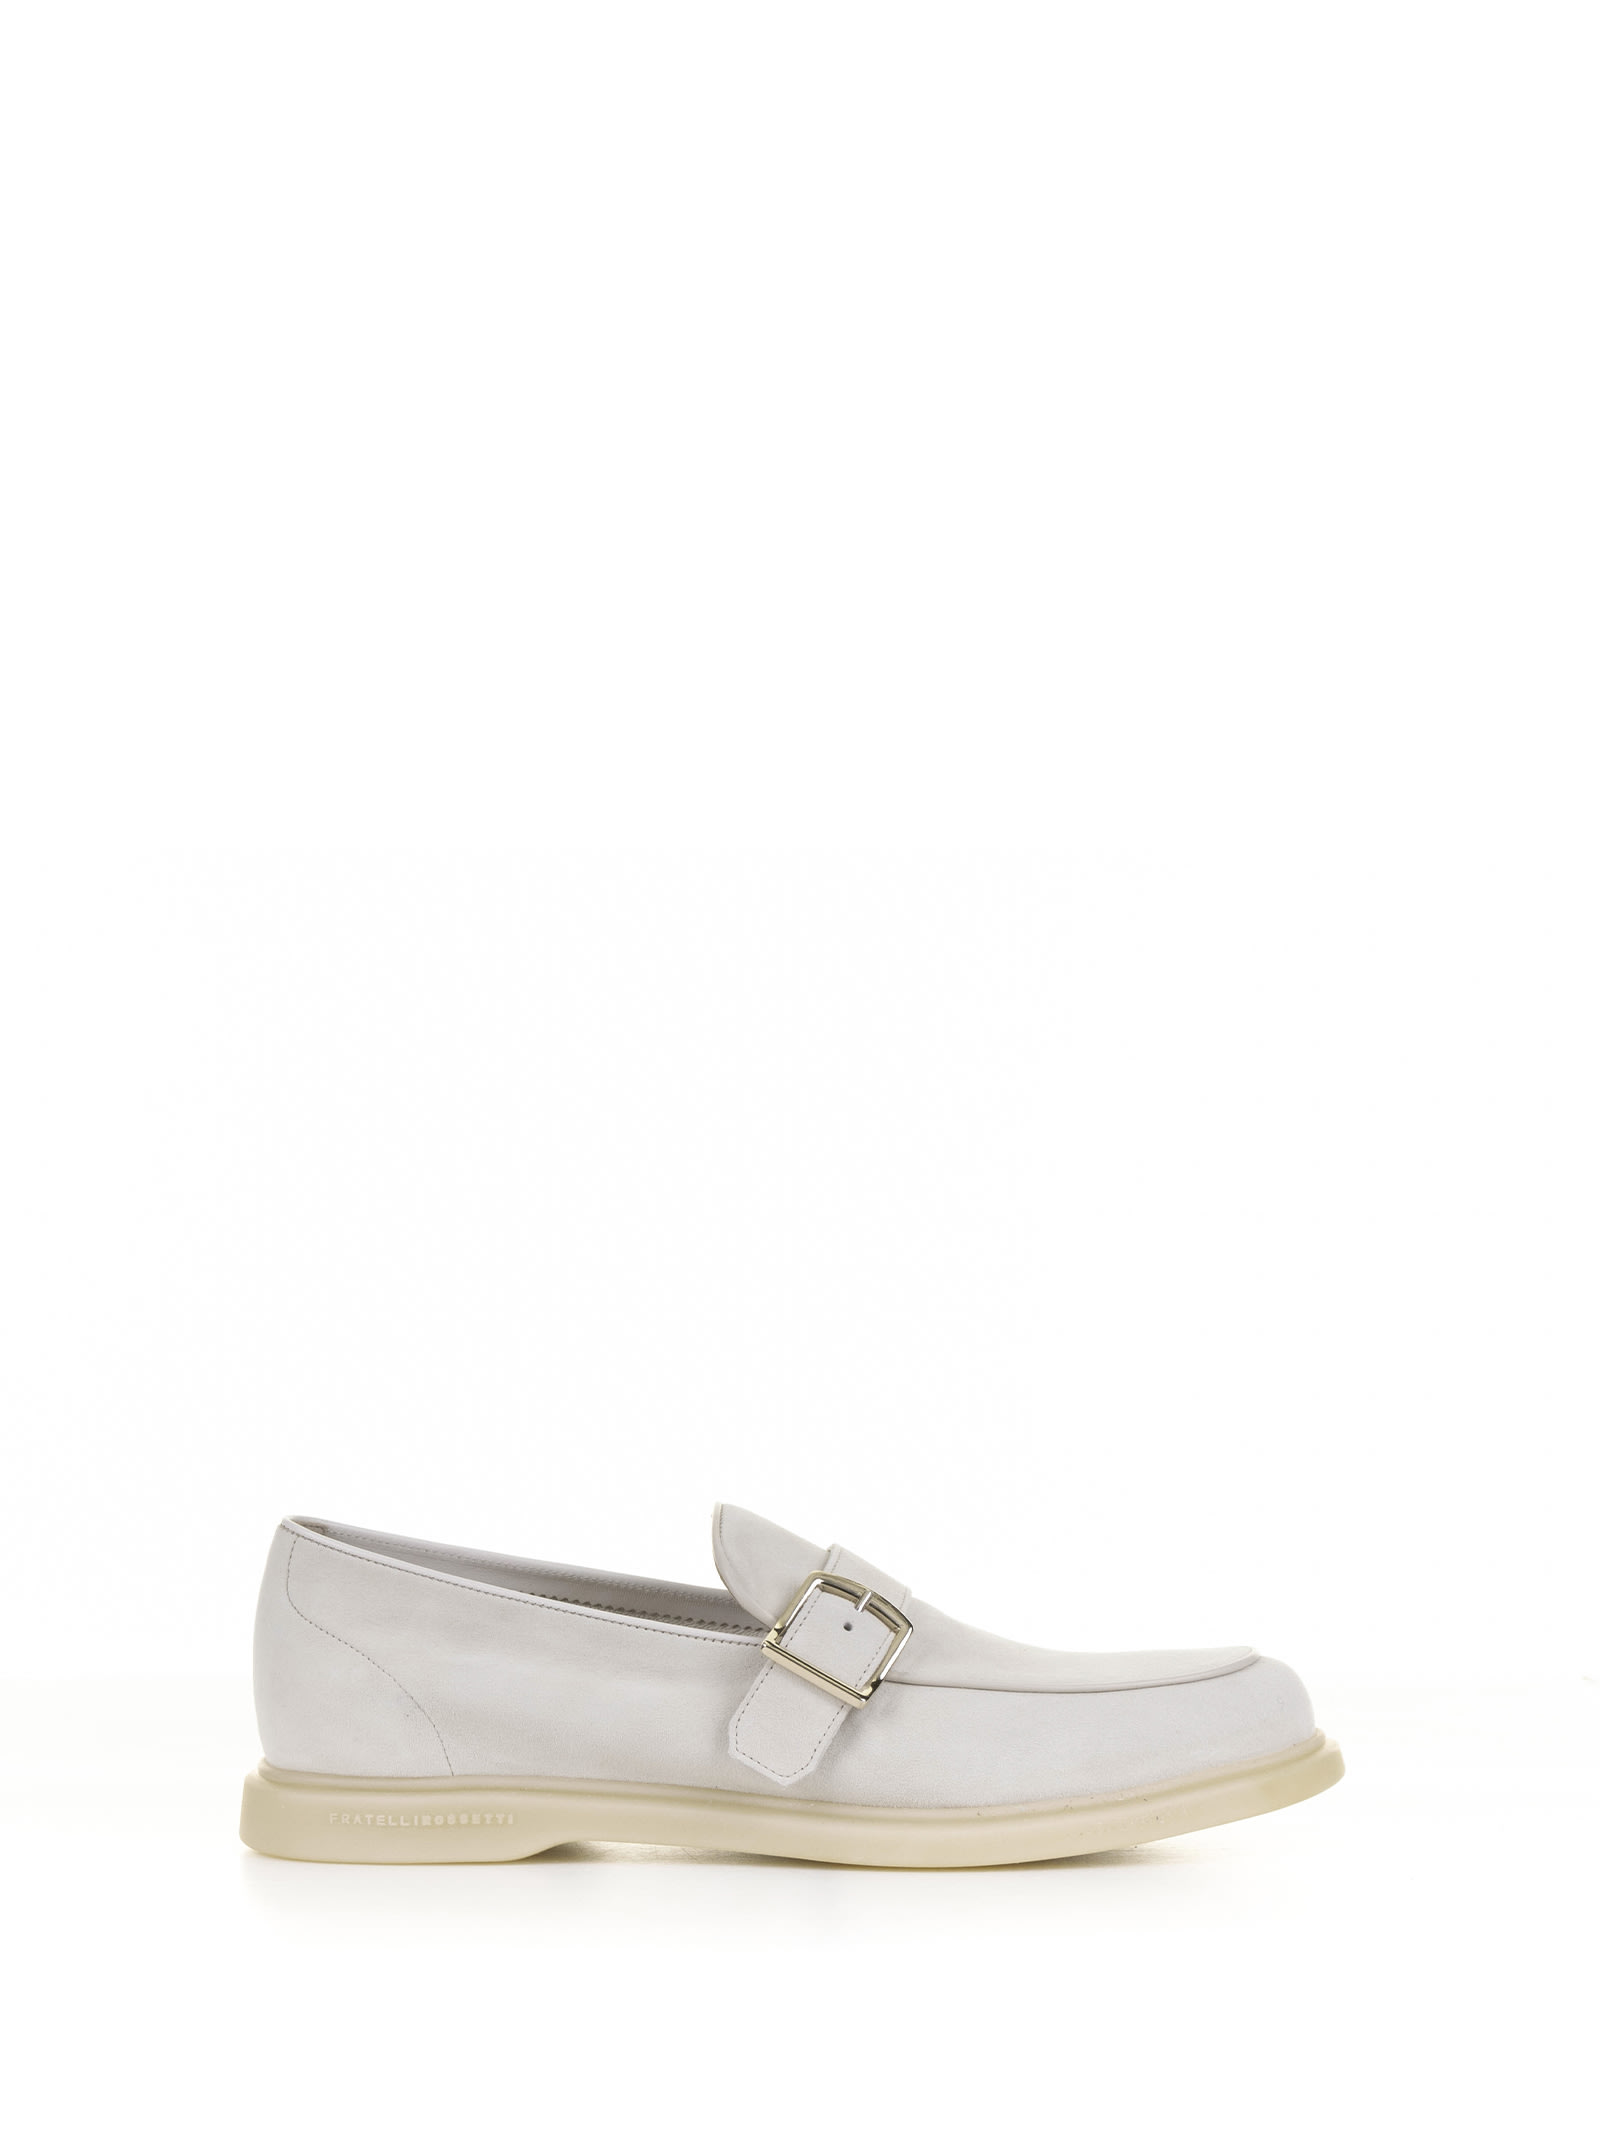 Ivory Suede Moccasin